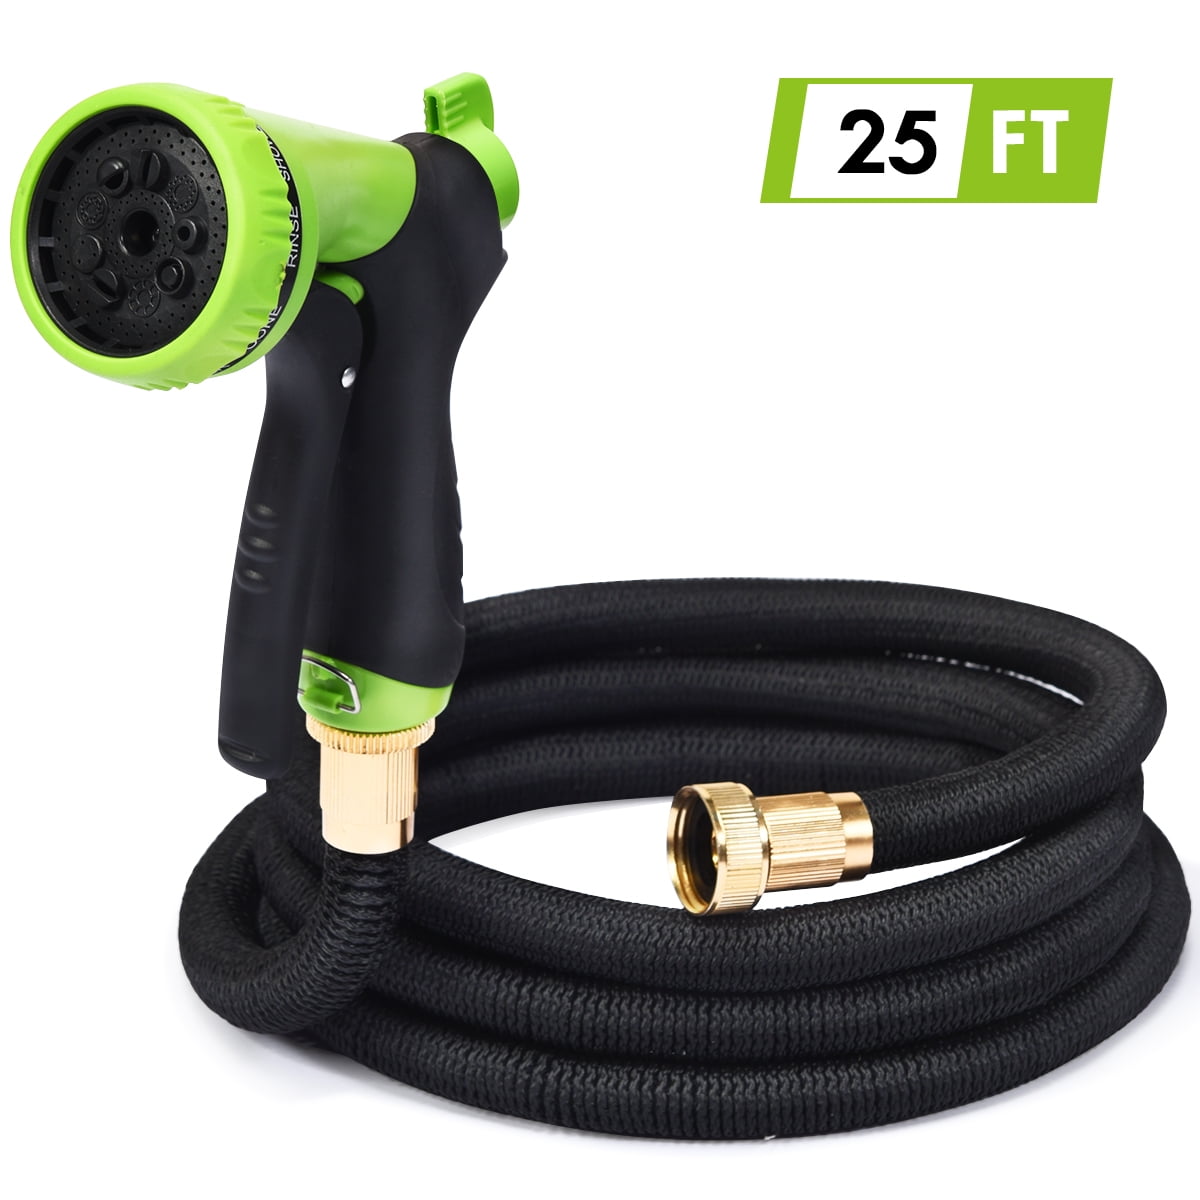 Garden Water Hose Expandable 25FT with Nozzle US Seller 